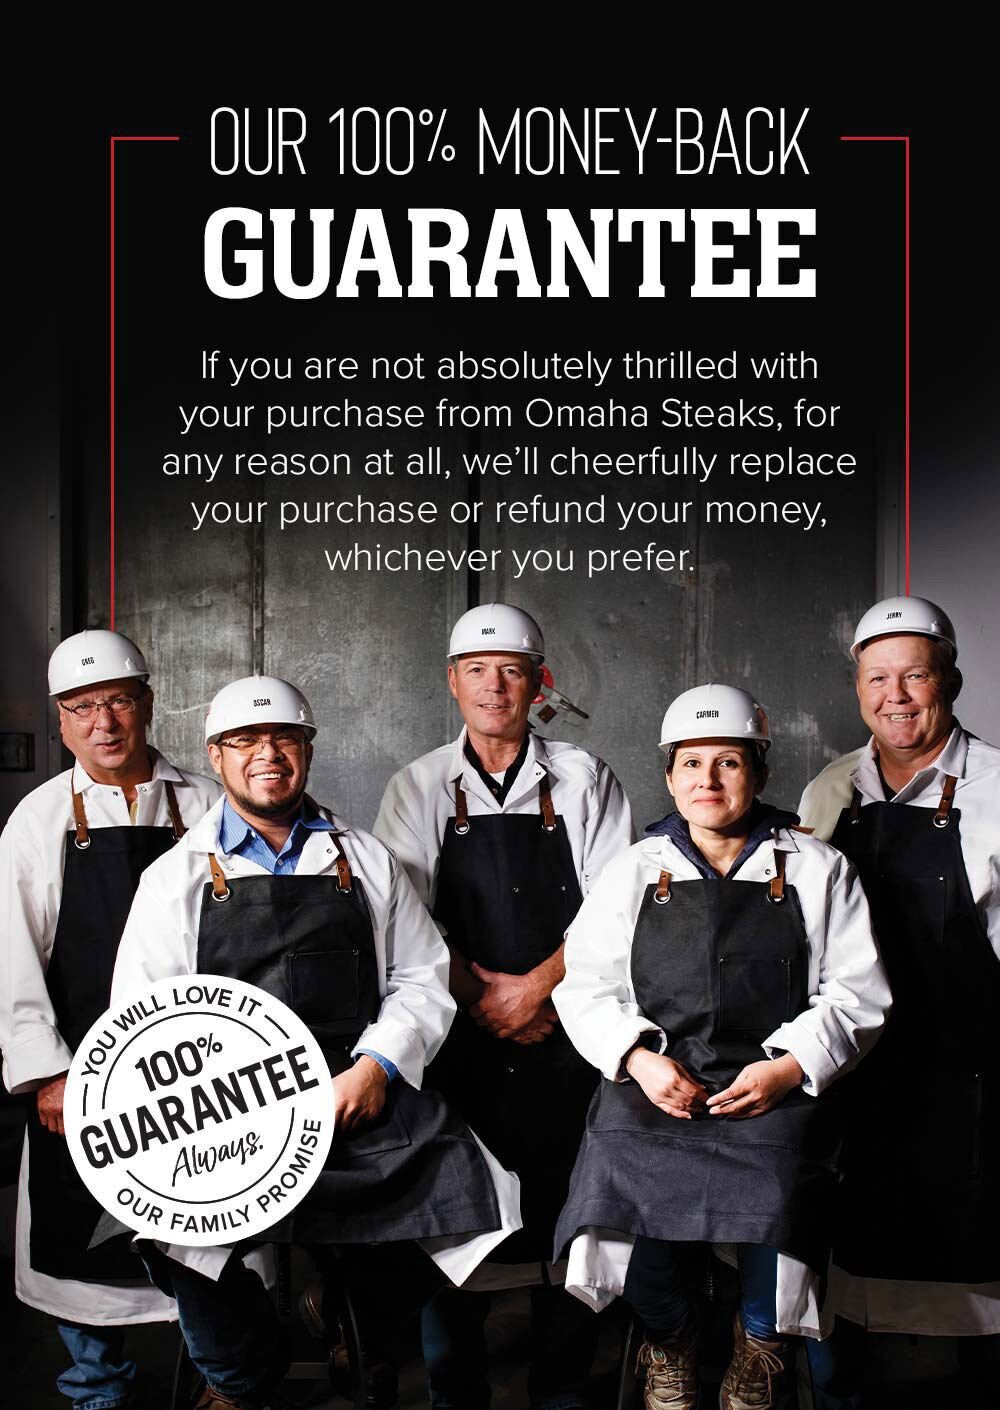 Our 100% Money-Back Guarantee | If you are not absolutely thrilled with your purchase from Omaha Steaks, for any reason at all, we'll cheerfully replace your purchase or refund your money, whichever you prefer.